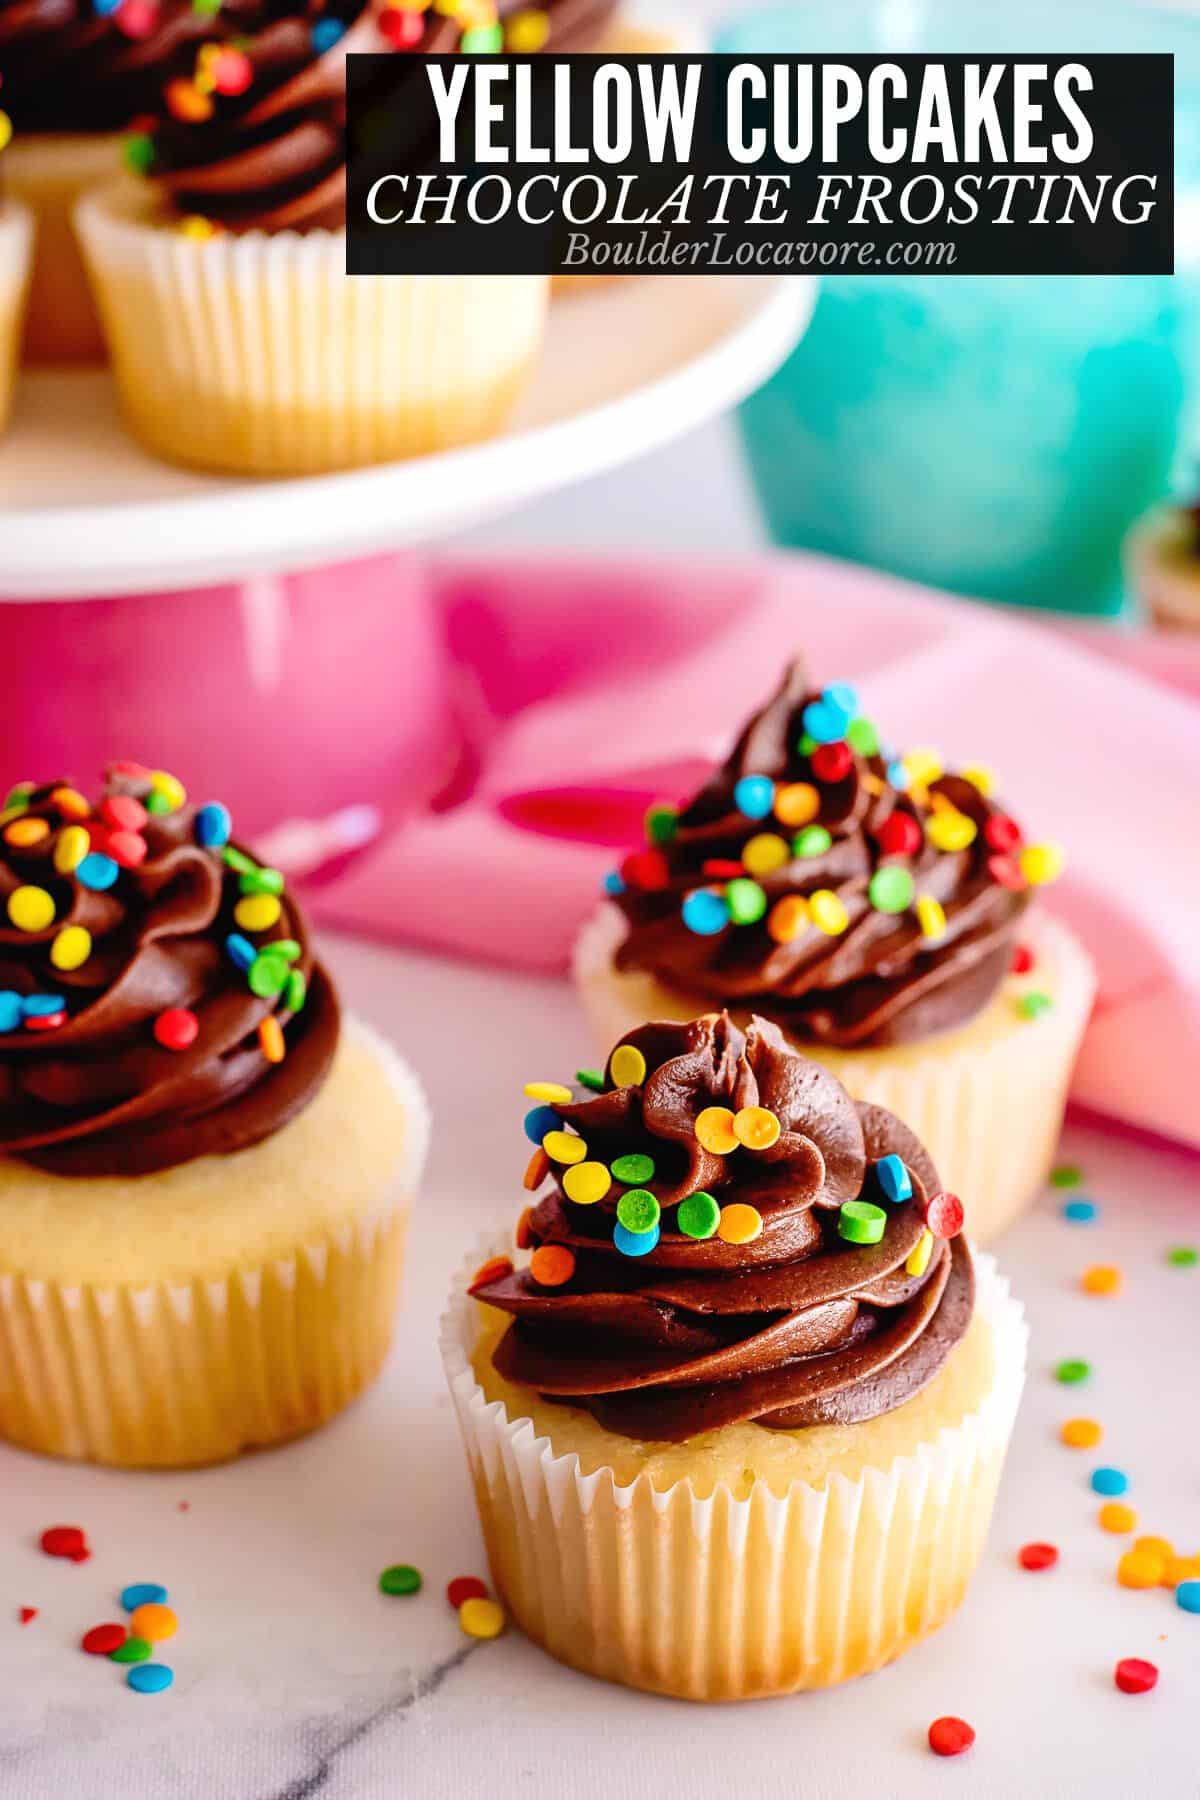 yellow cupcakes with chocolate buttercream frosting and sprinkles.